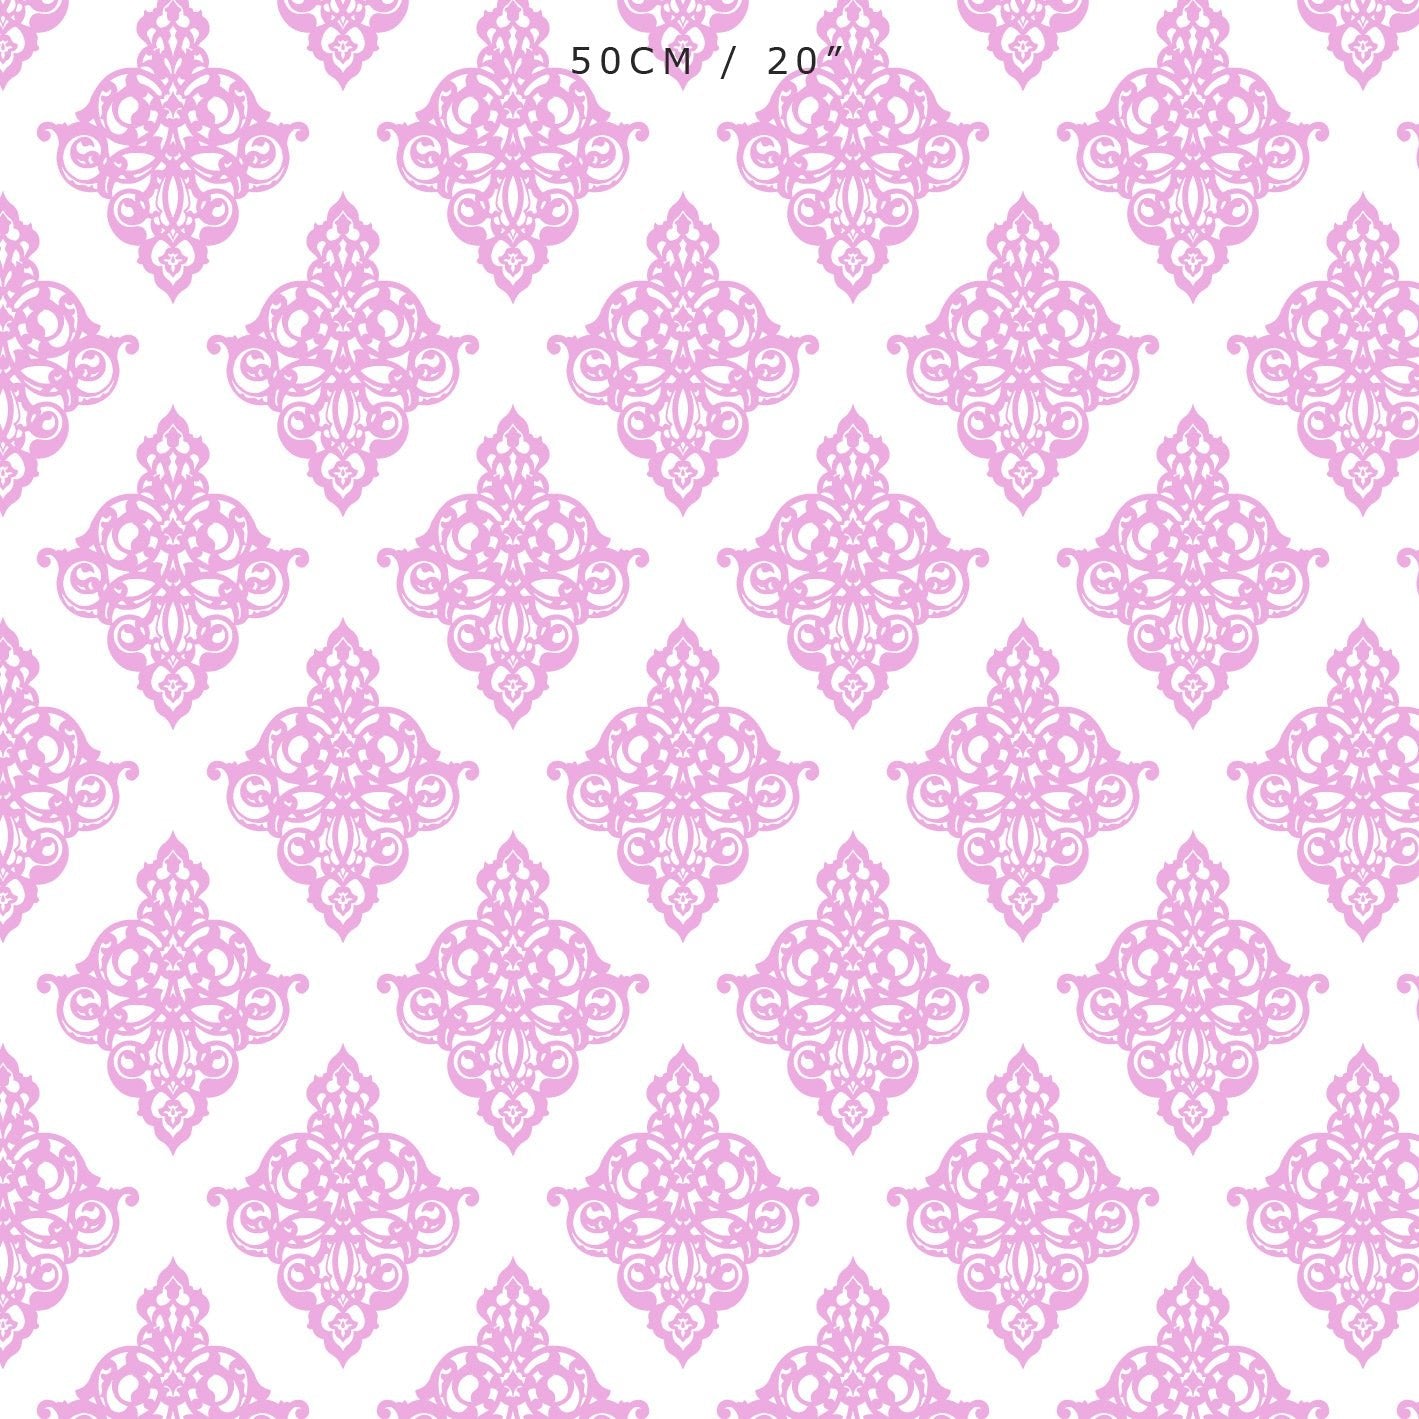 Damask Fabric - Tickled Pink - Hydrangea Lane Home